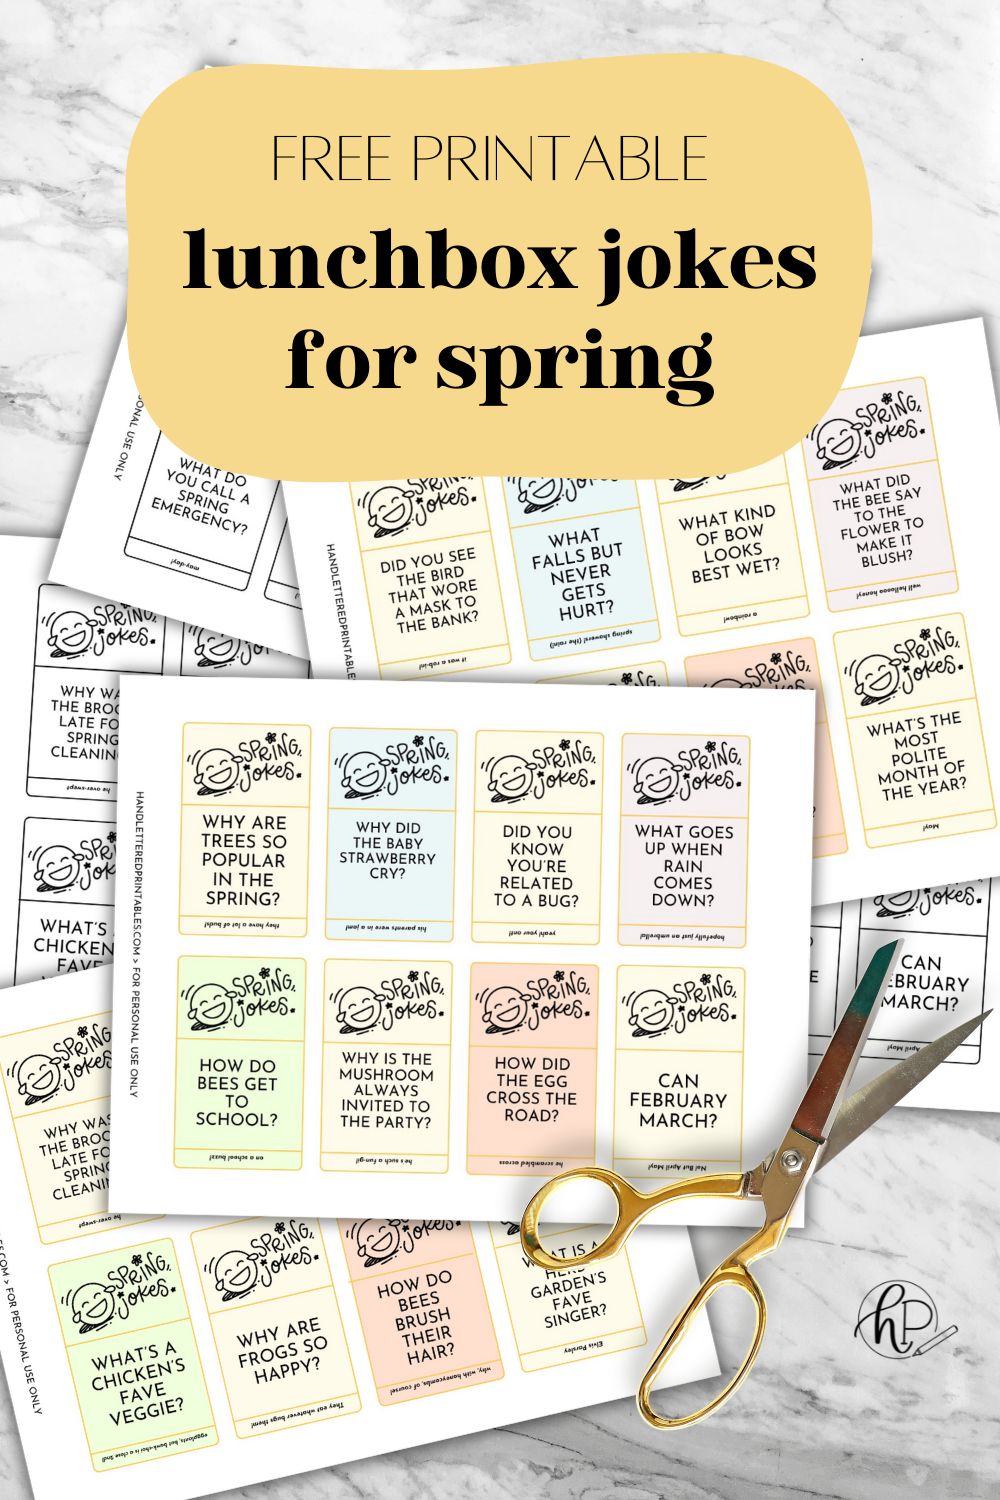 image of printed joke cards 6 to a page on marble countertop with gold scissors on top. text over reads: free printable lunchbox jokes for spring